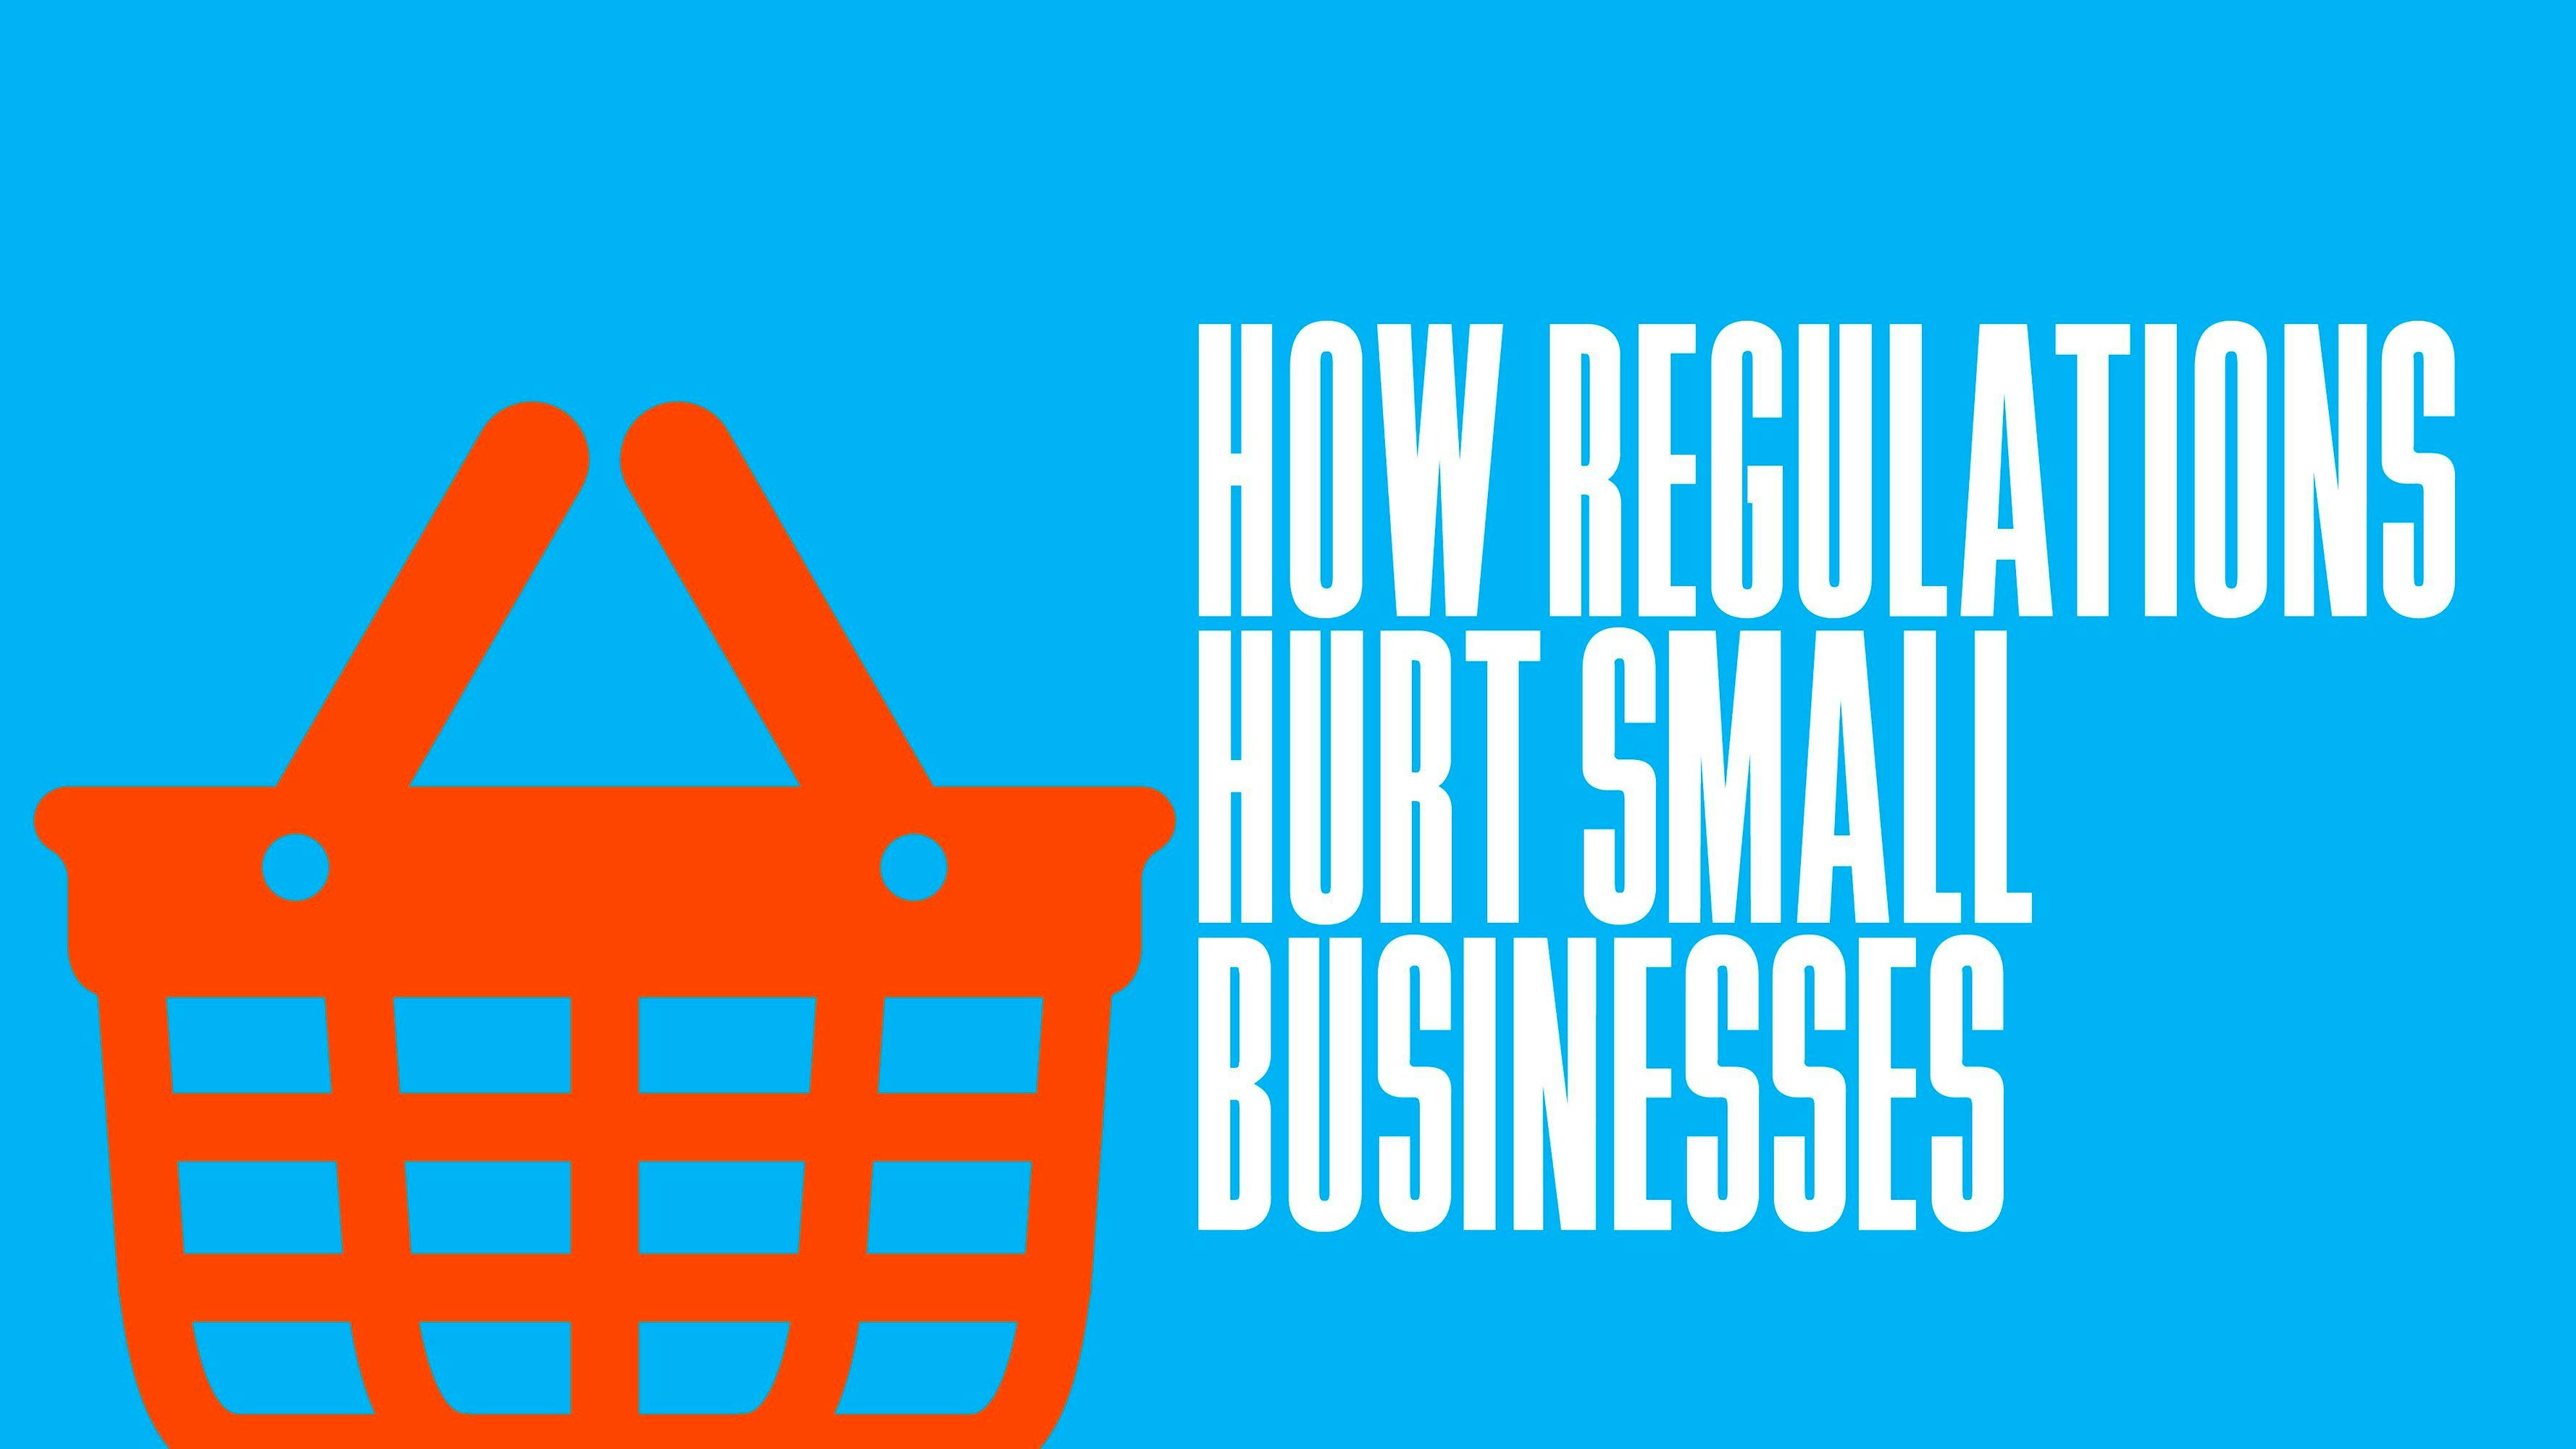 How Regulations Hurt Small Businesses